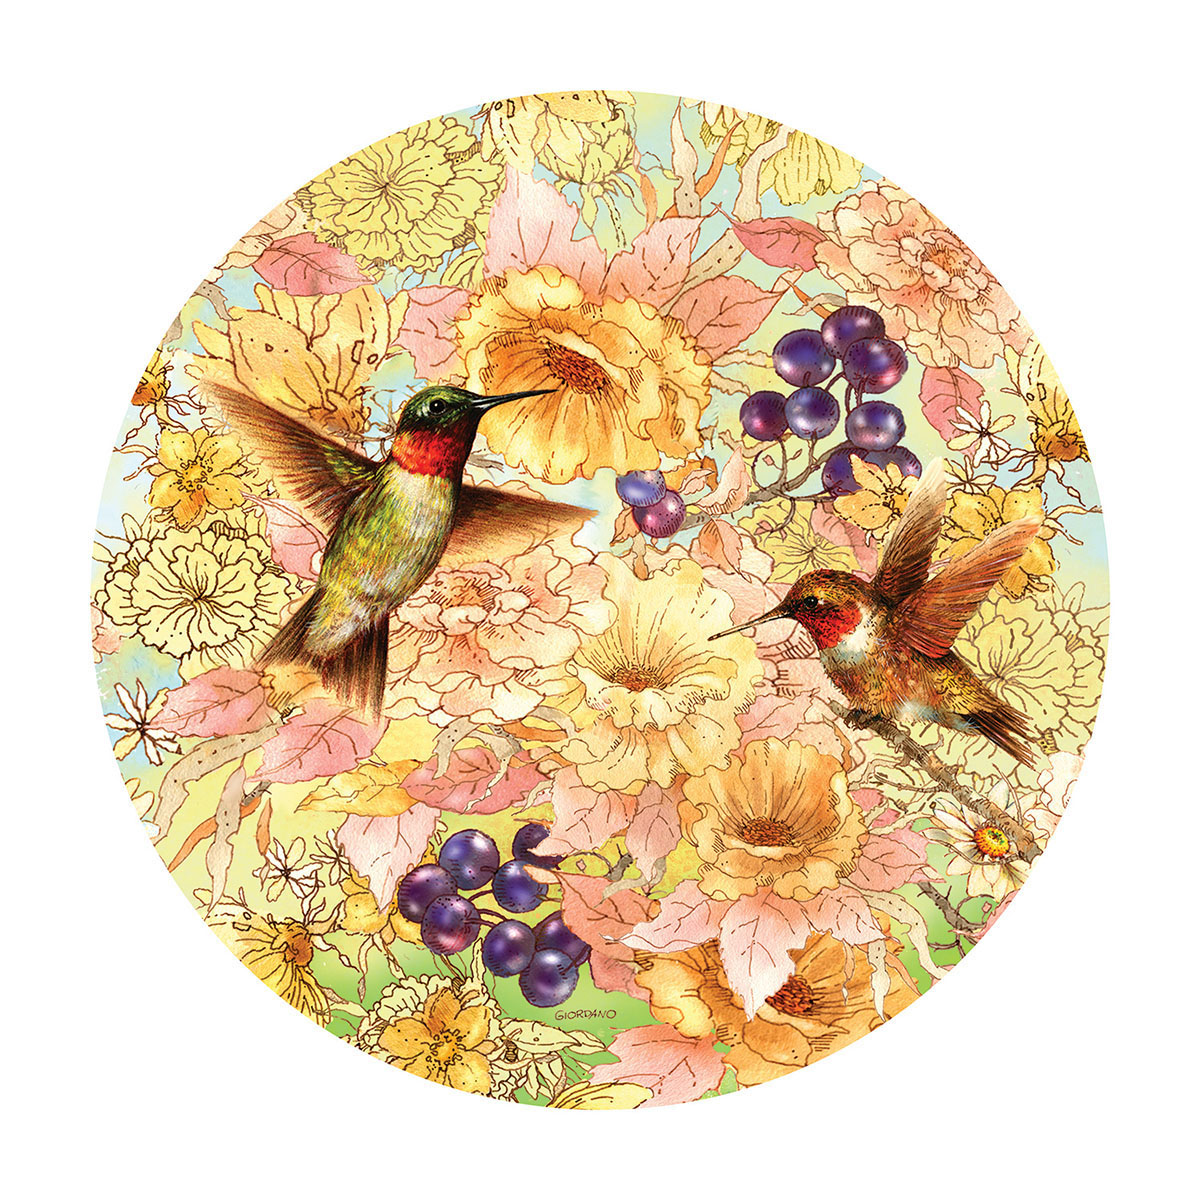 Hummingbirds and Berries Birds Shaped Puzzle